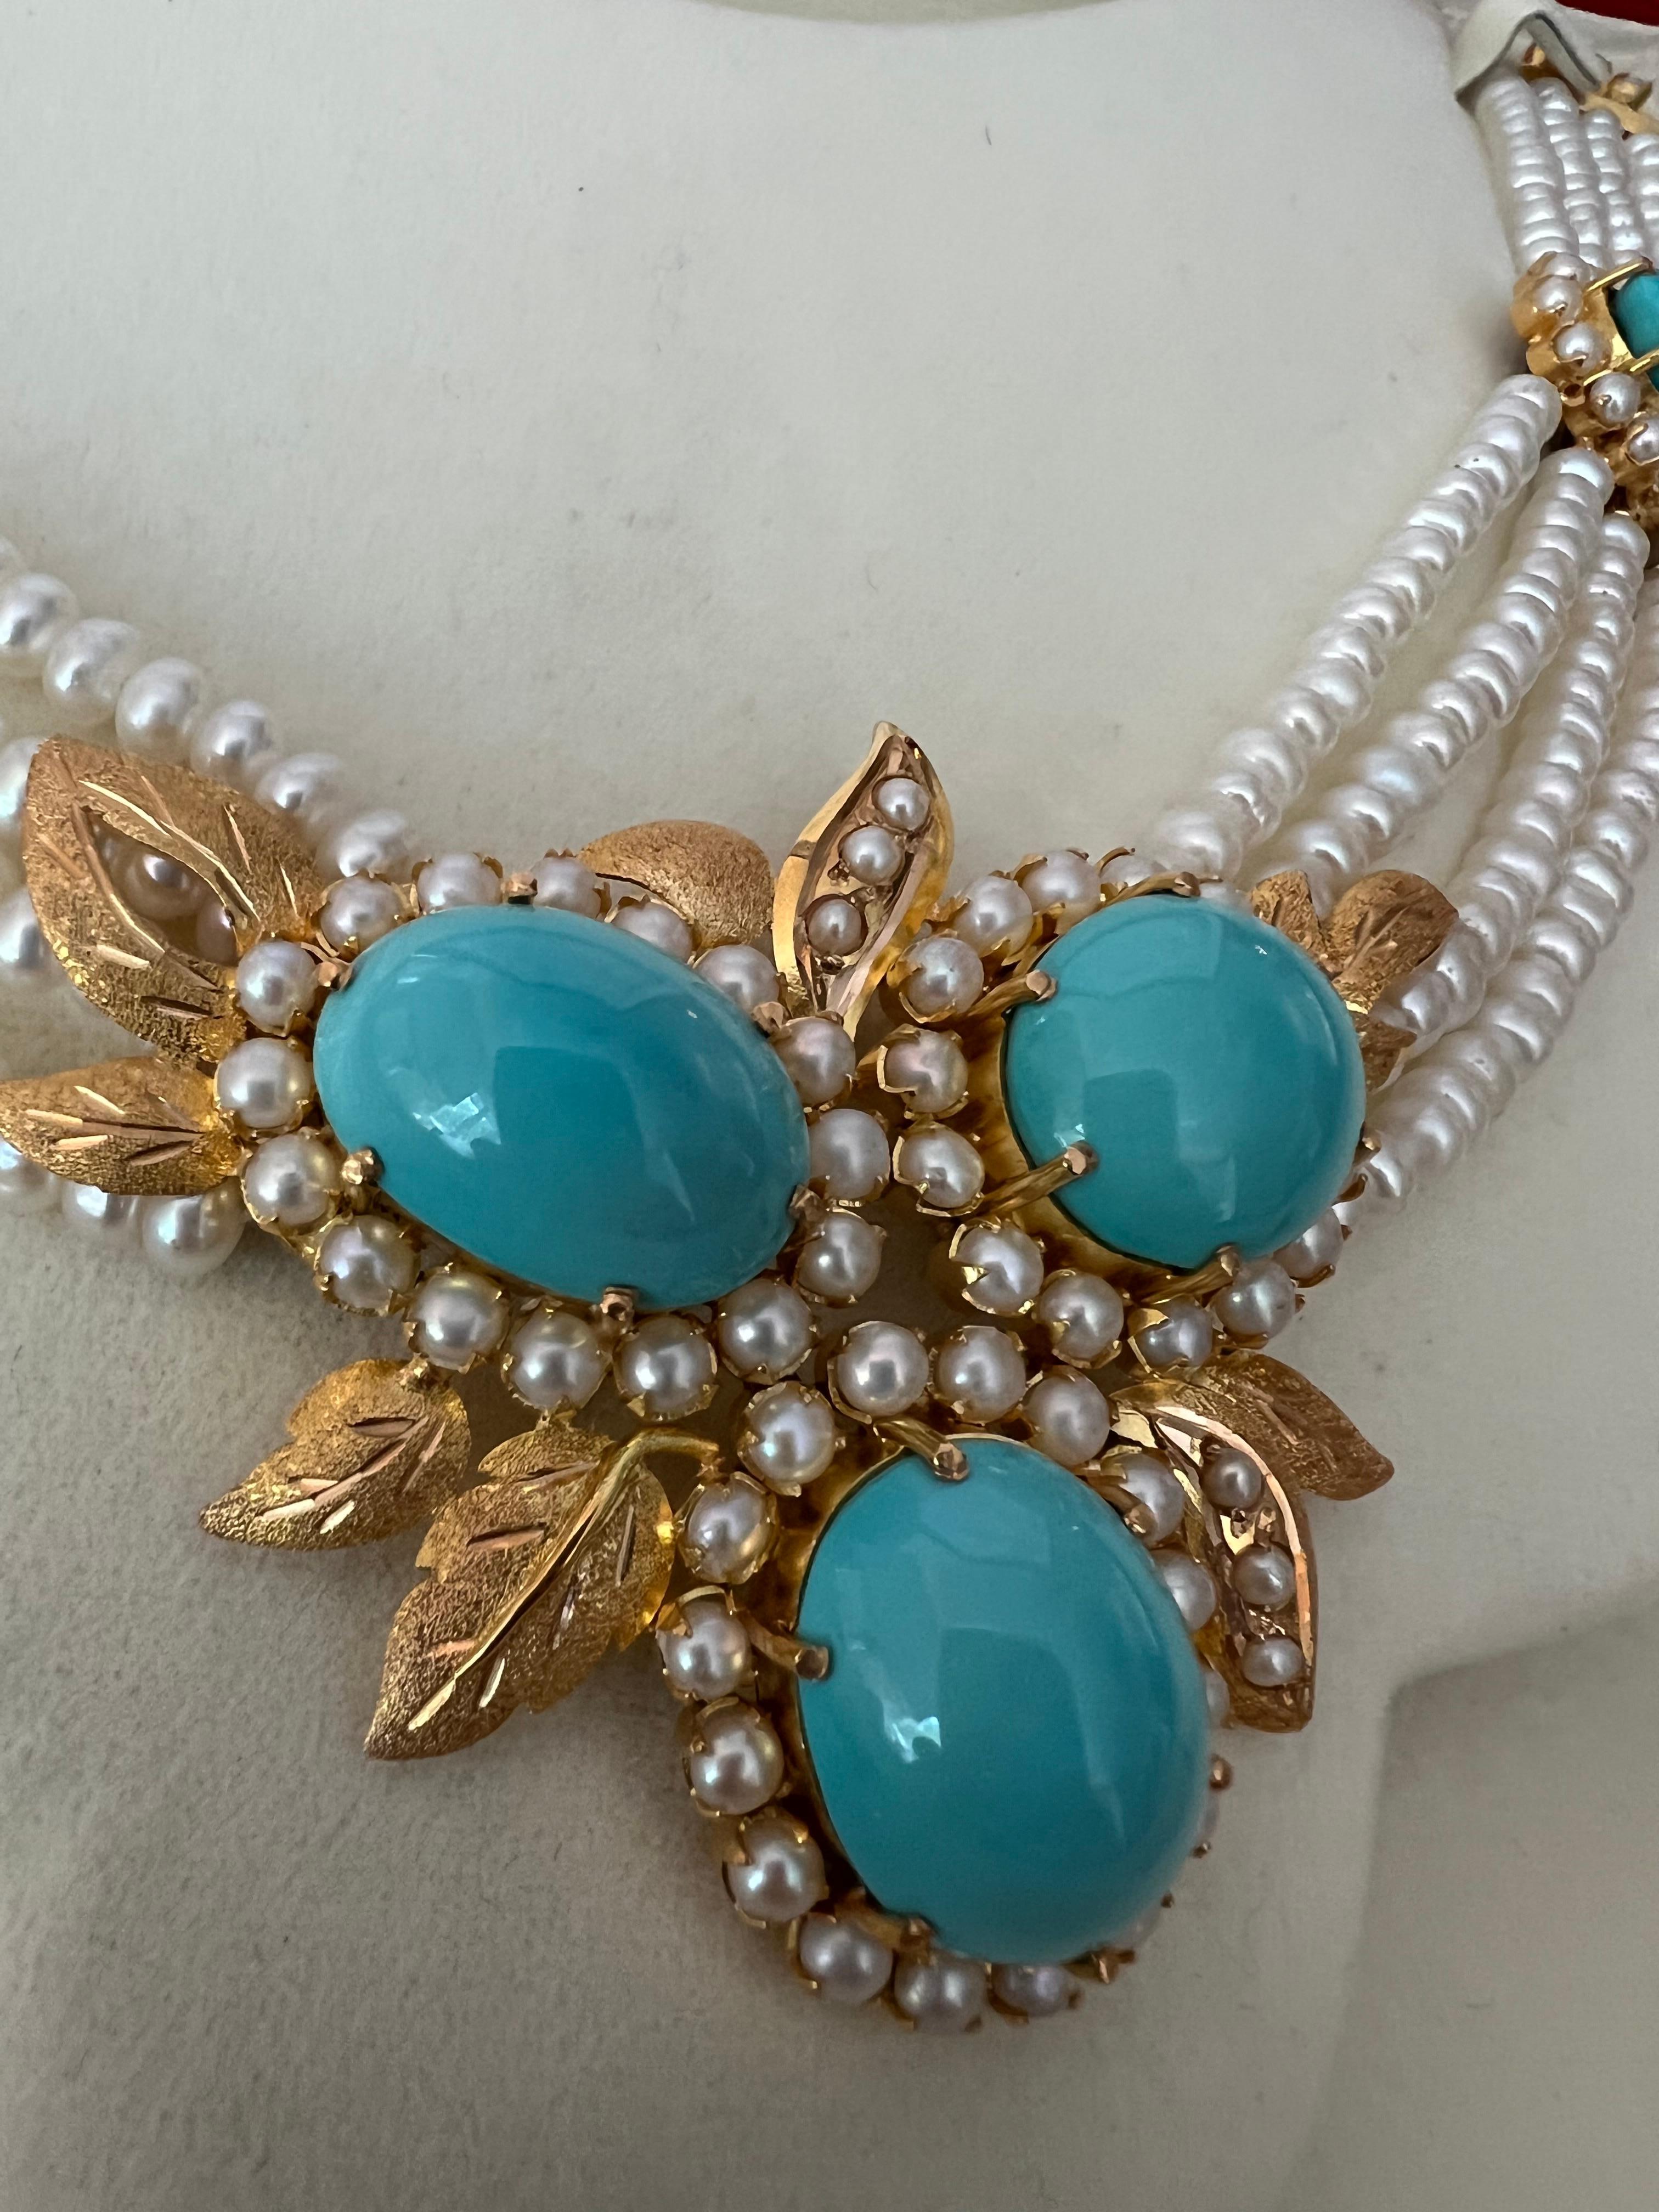 Up for sale is a truly unique and fabulous Turkish, turquoise pearl and gold necklace and earrings set.


The necklace weighs a total of 75 grams and consists of over 260 freshwater pearls and five large turquoise cabochons, each about 16-17mm long.